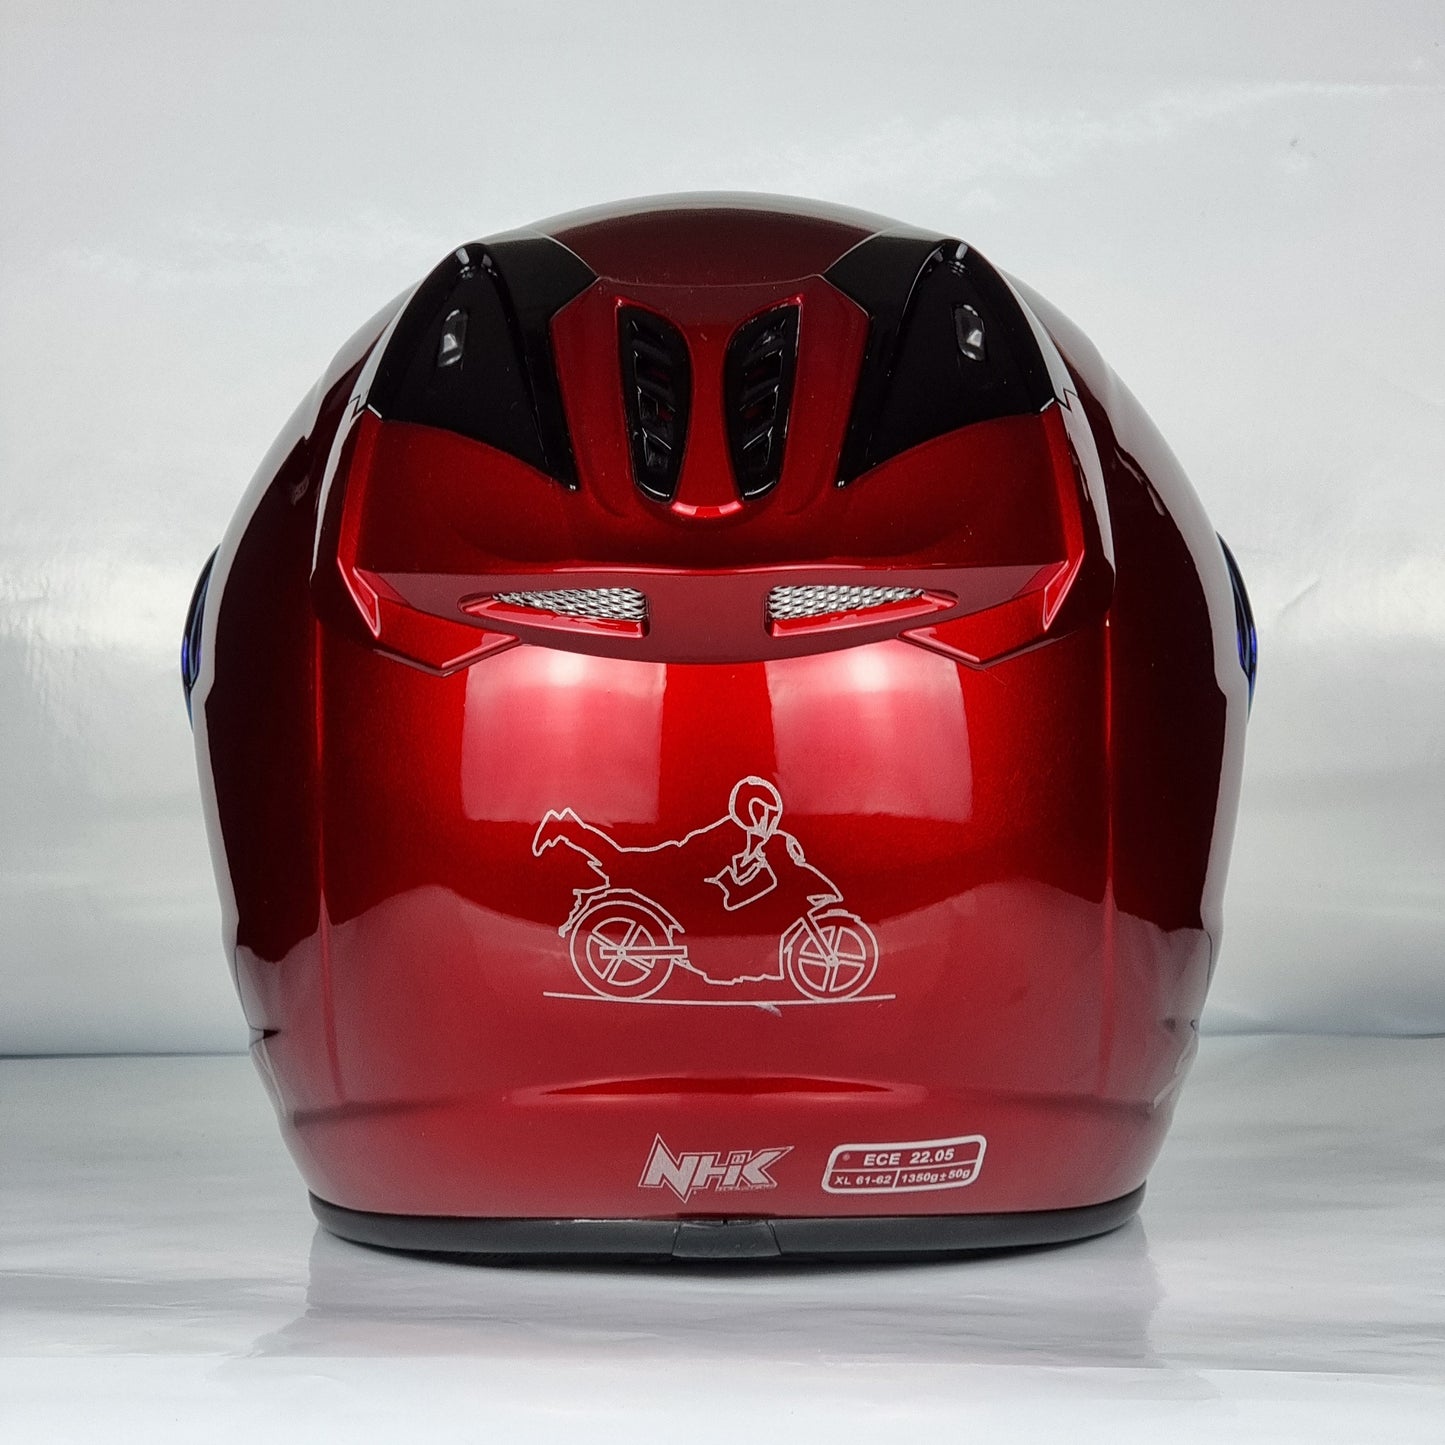 NHK Helmet X SUPERFLY R6 v2 Solid (Candy Red Glossy)